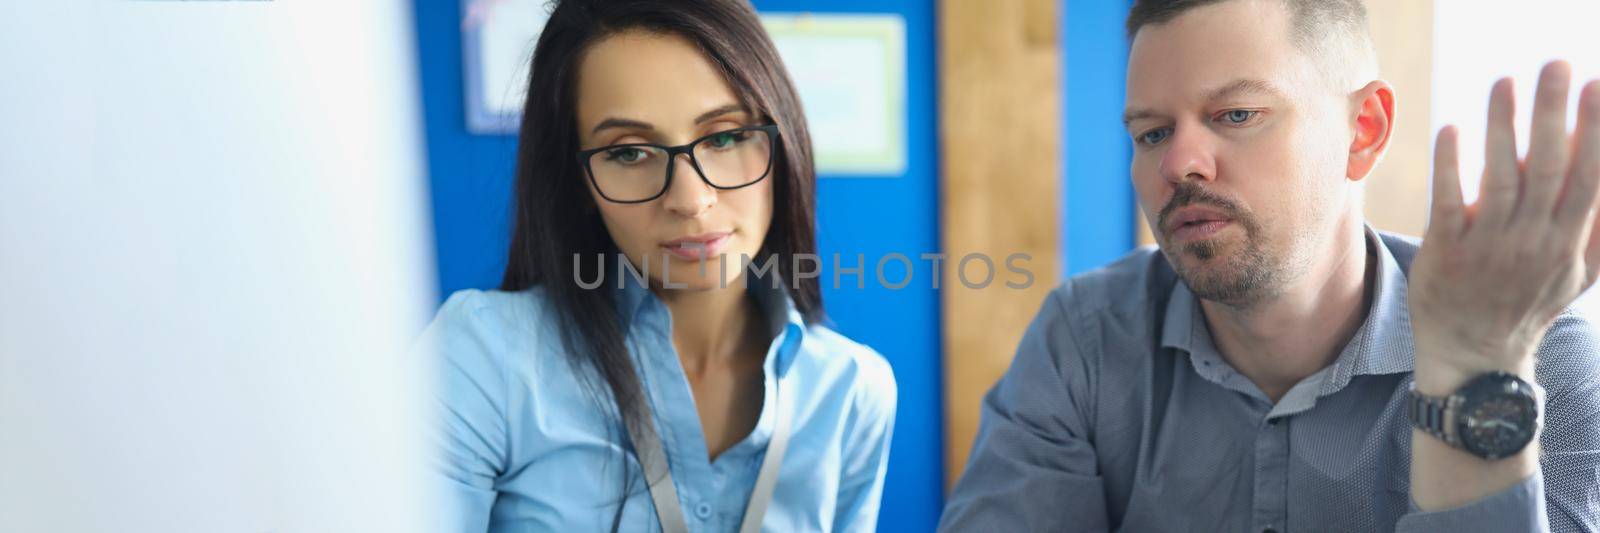 Man and woman in glasses sitting at table in front of computer screen by kuprevich